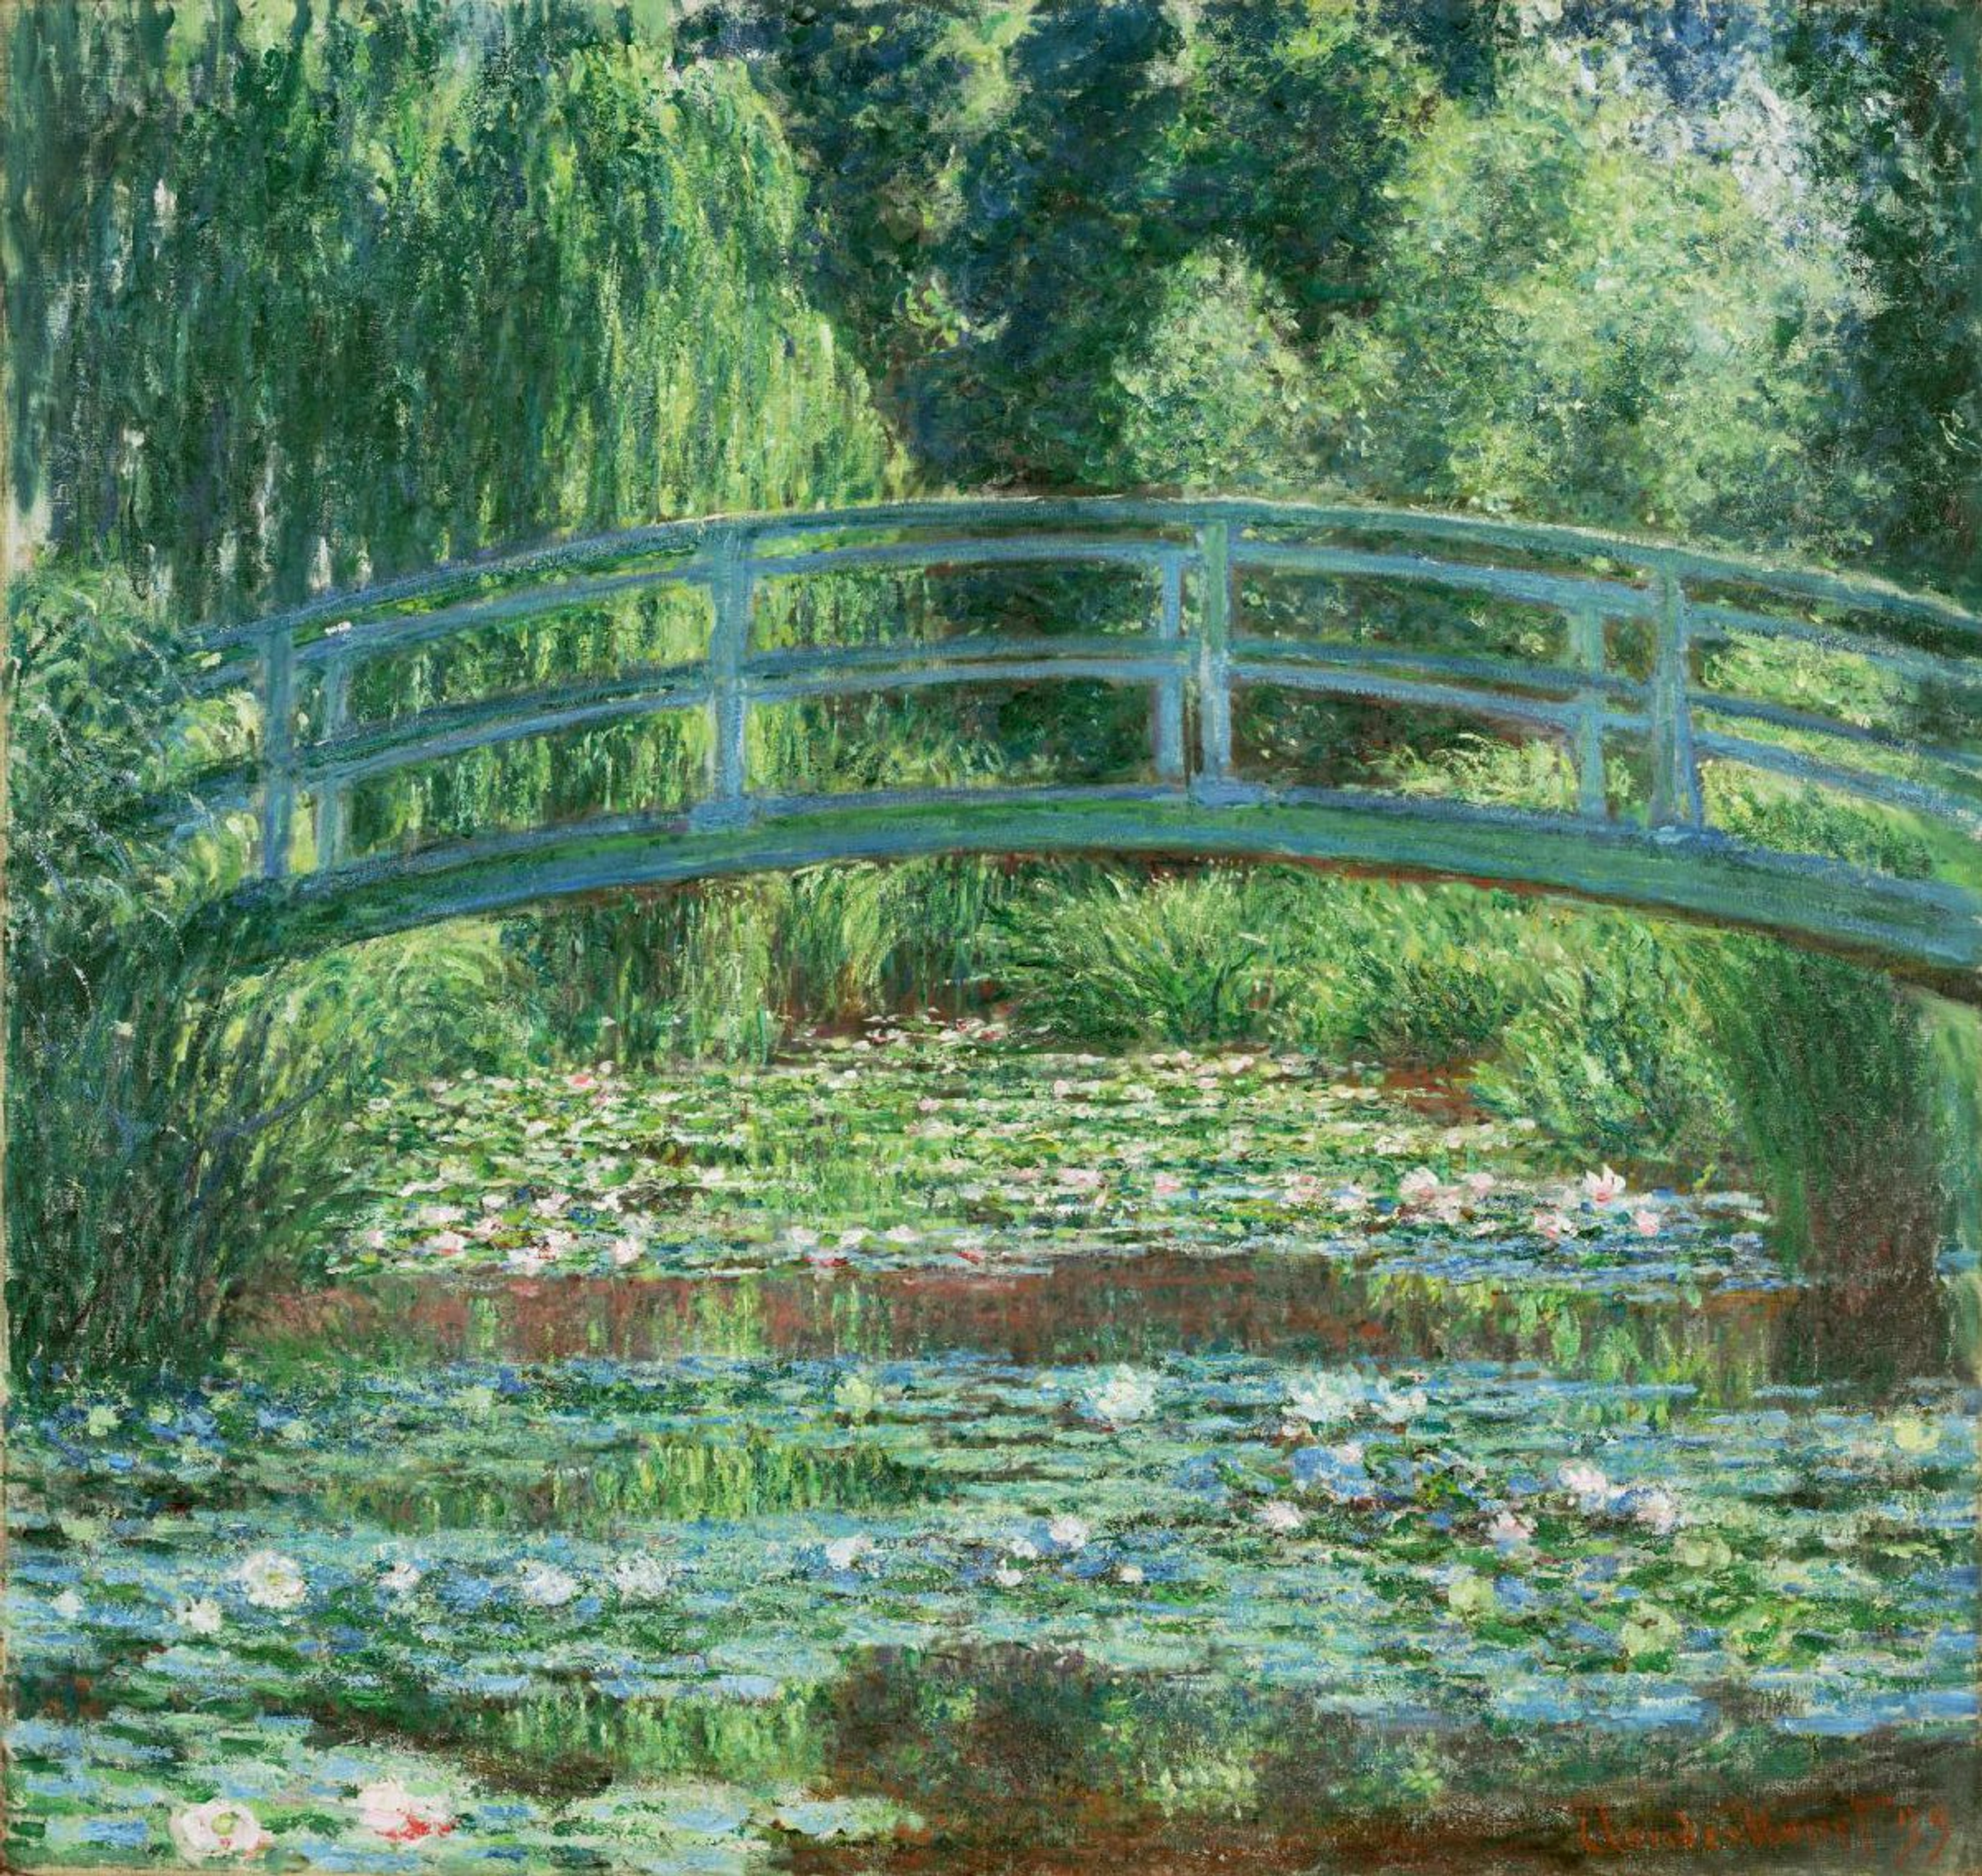 This painting by Claude Monet shows a wooden bridge over a lily pond. The colour palette is almost entirely done in shades of green.